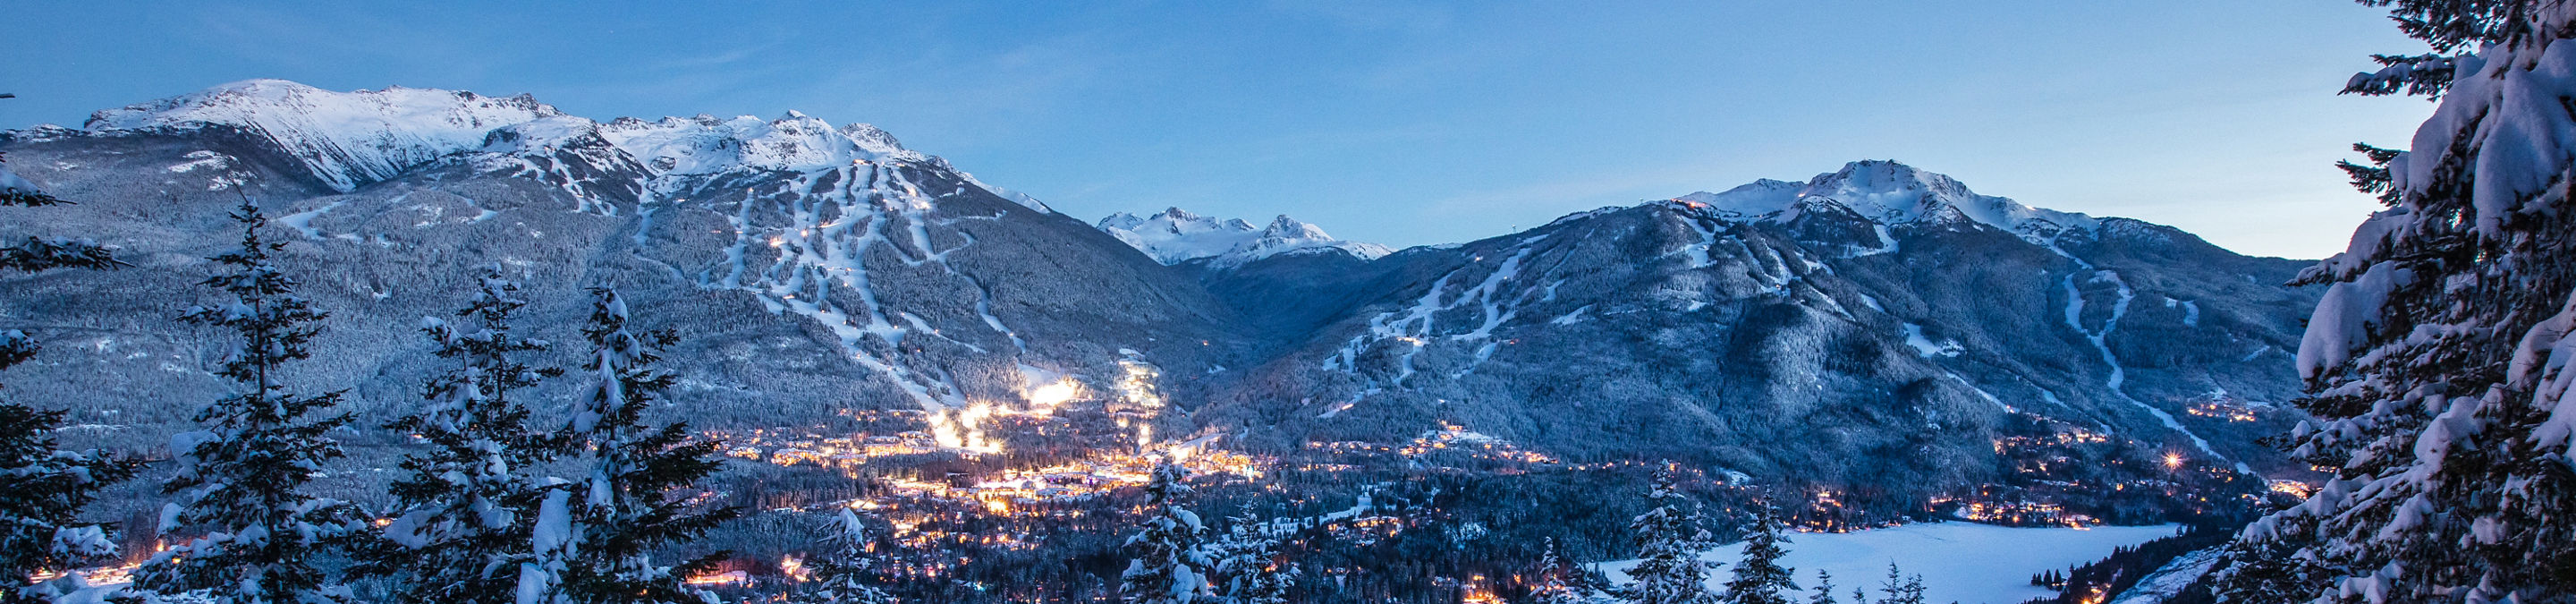 Whistler and Blackcomb Mountains at Dusk